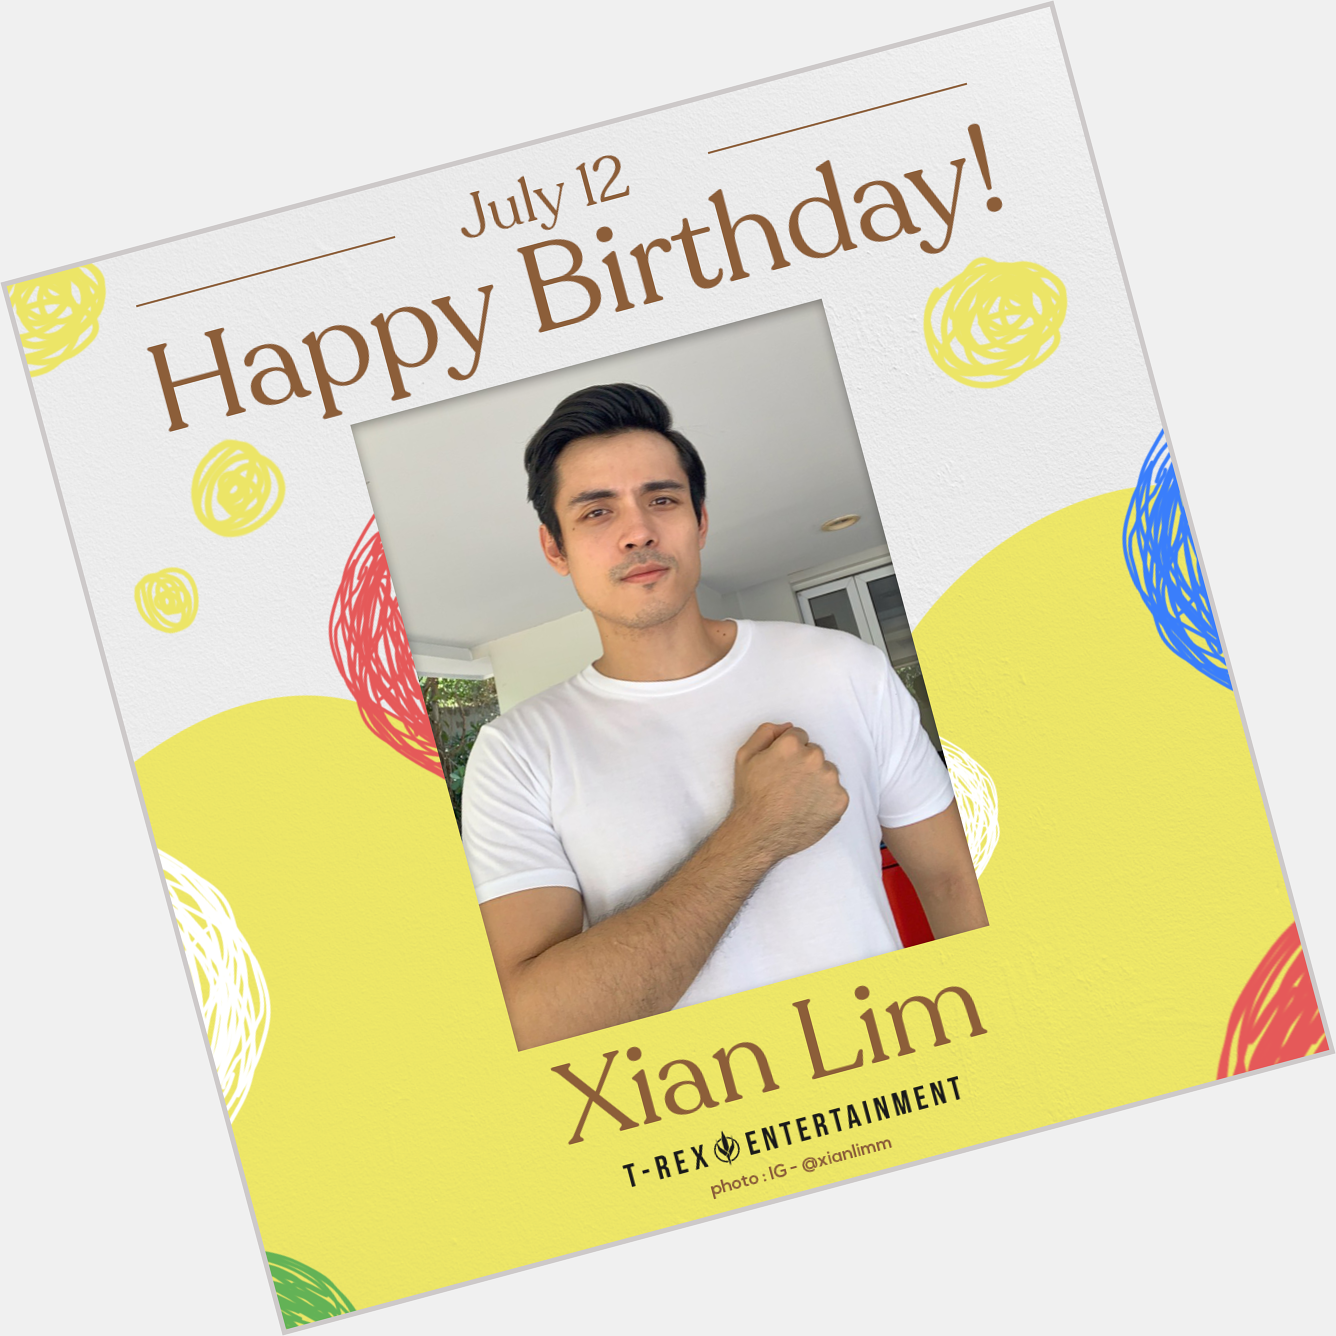 July 12 is Xian Lim\s birthday!

Happy birthday to you and God bless you, 